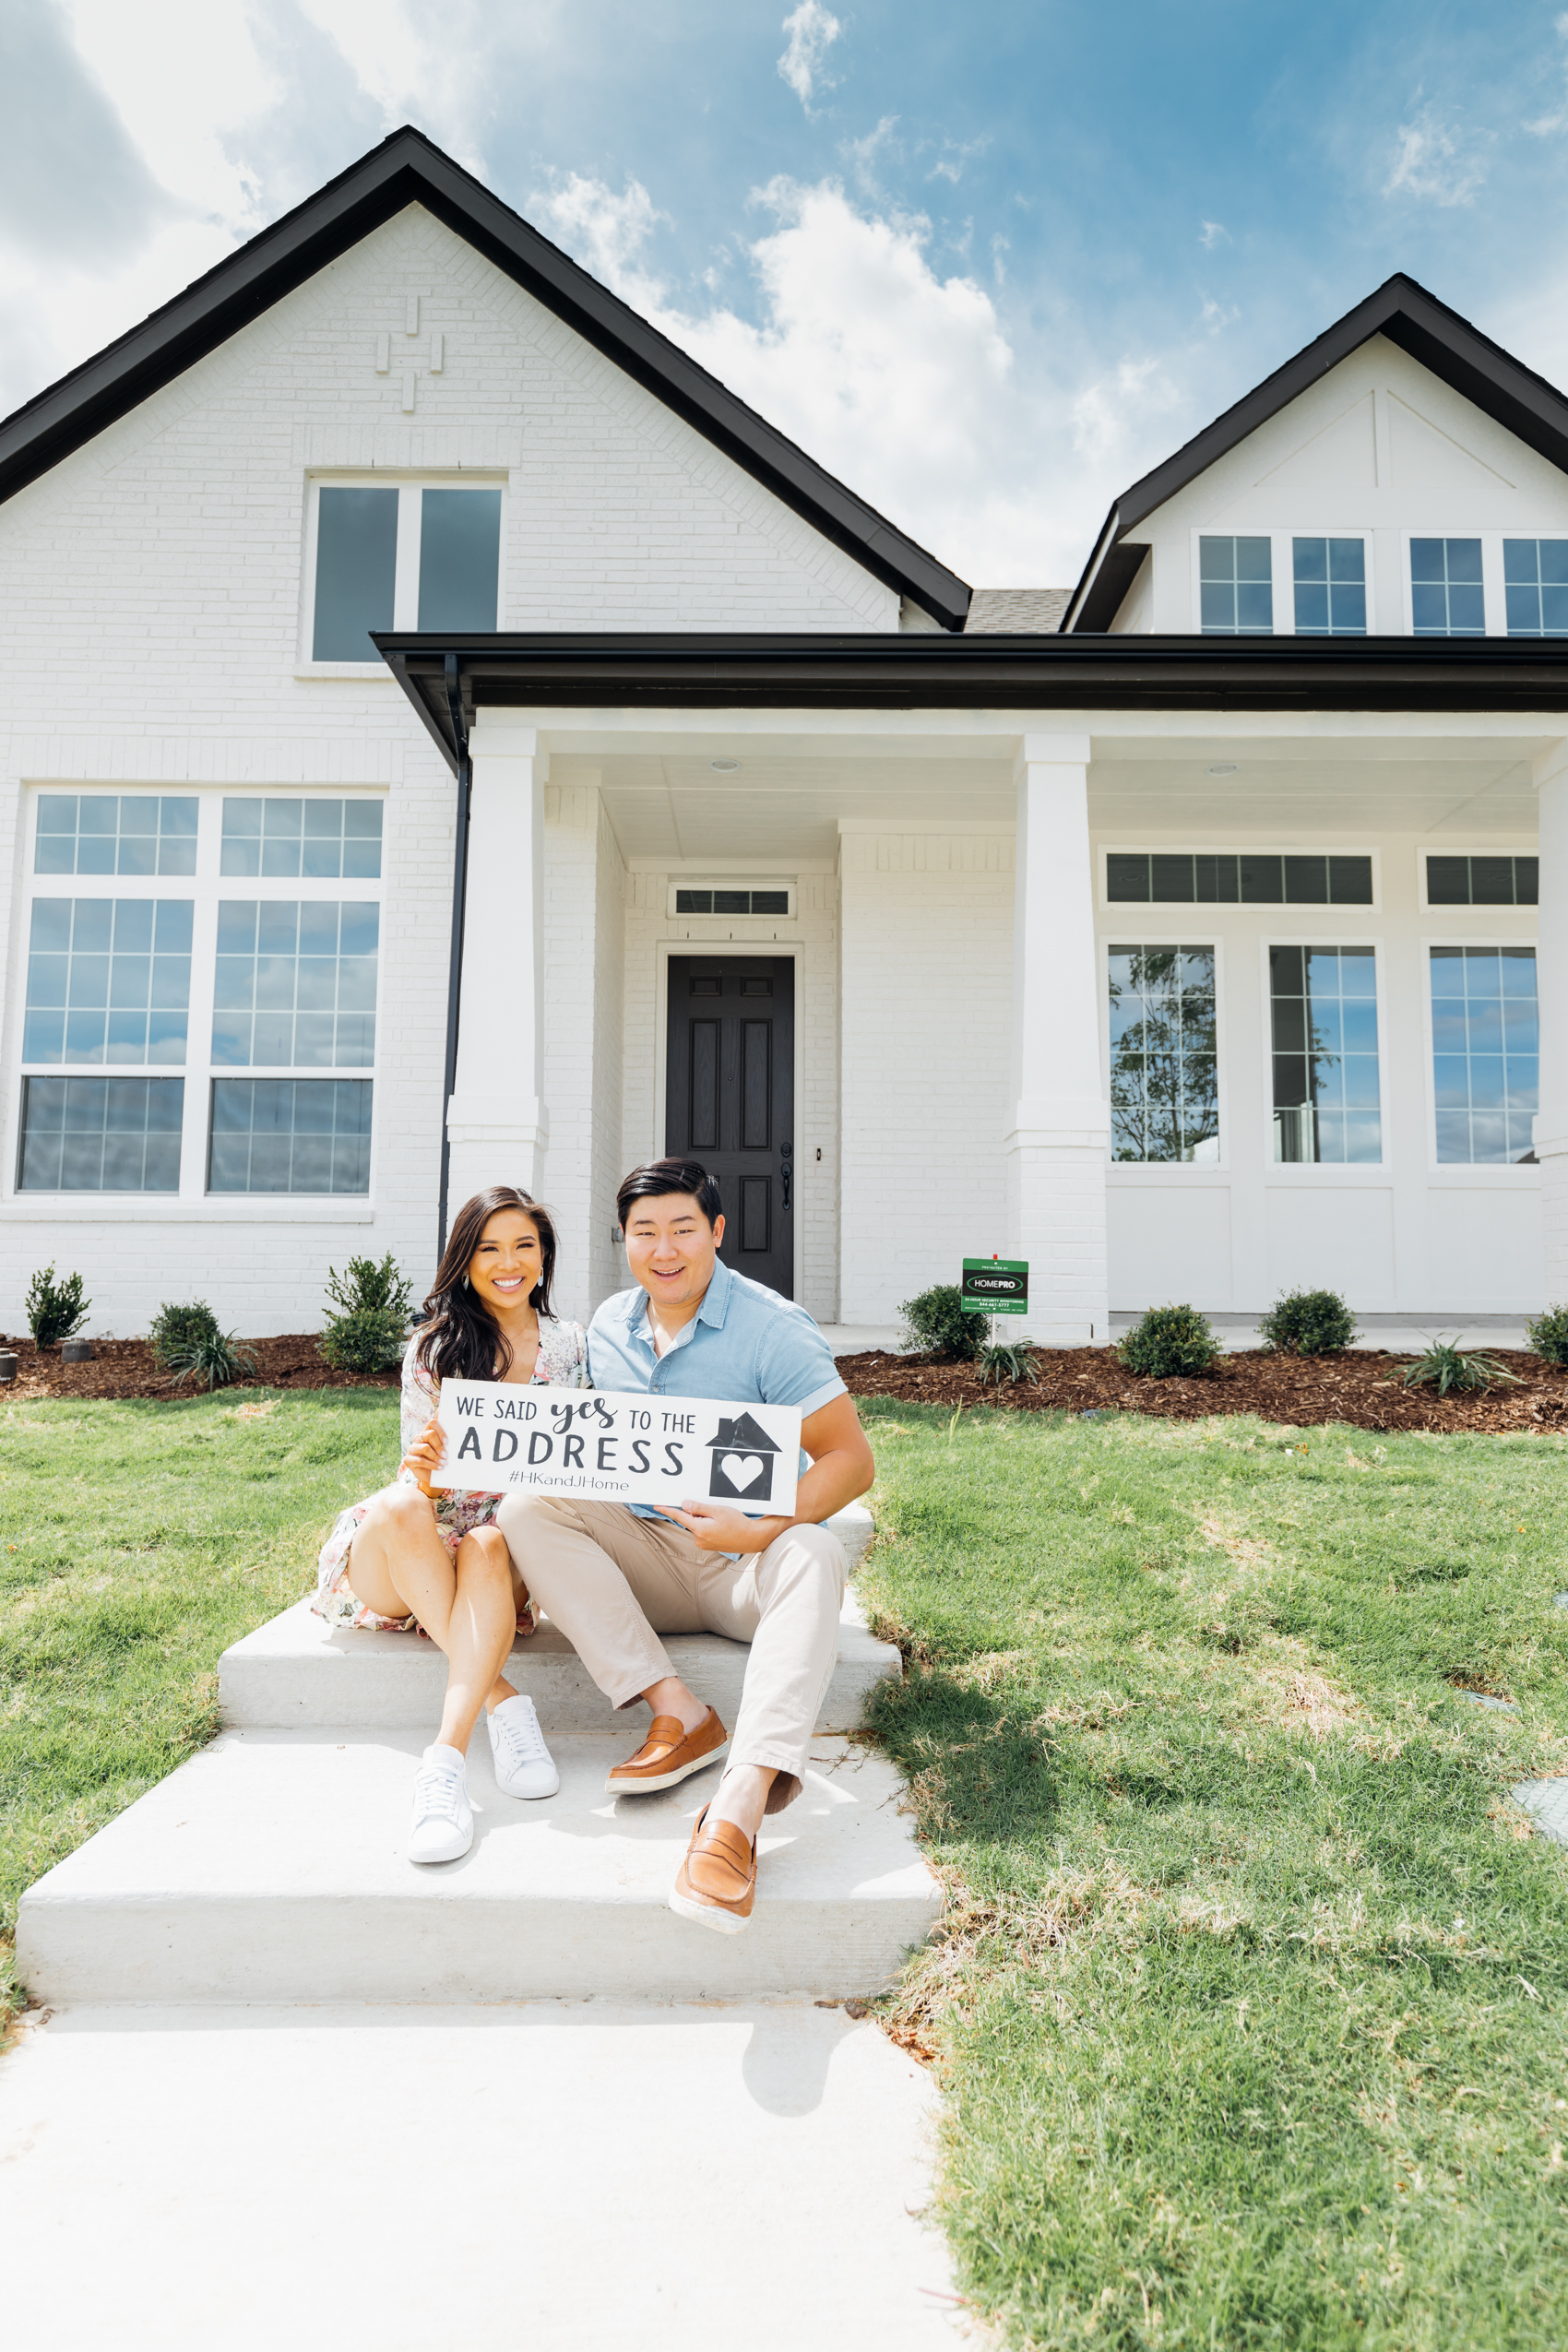 Blogger Hoang-Kim and her fiance Johnny in front of their new build home in Dallas that's a one-story home with white painted brick and black trim wearing a floral romper and chambray shirt